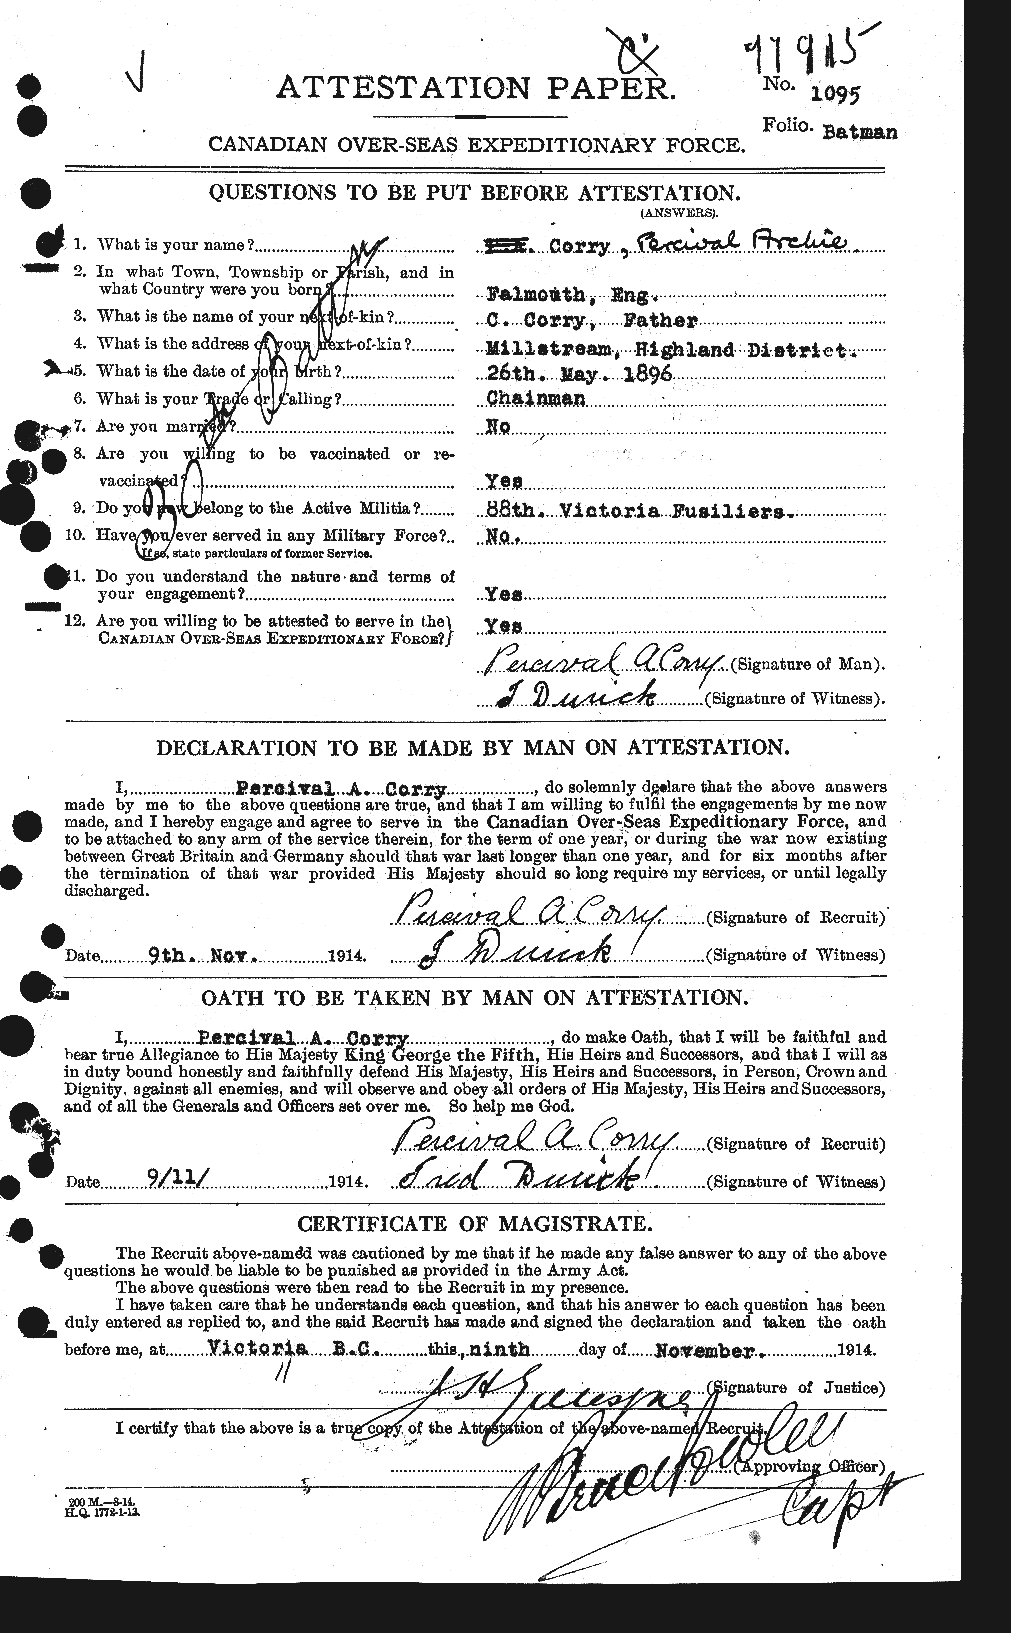 Personnel Records of the First World War - CEF 054214a